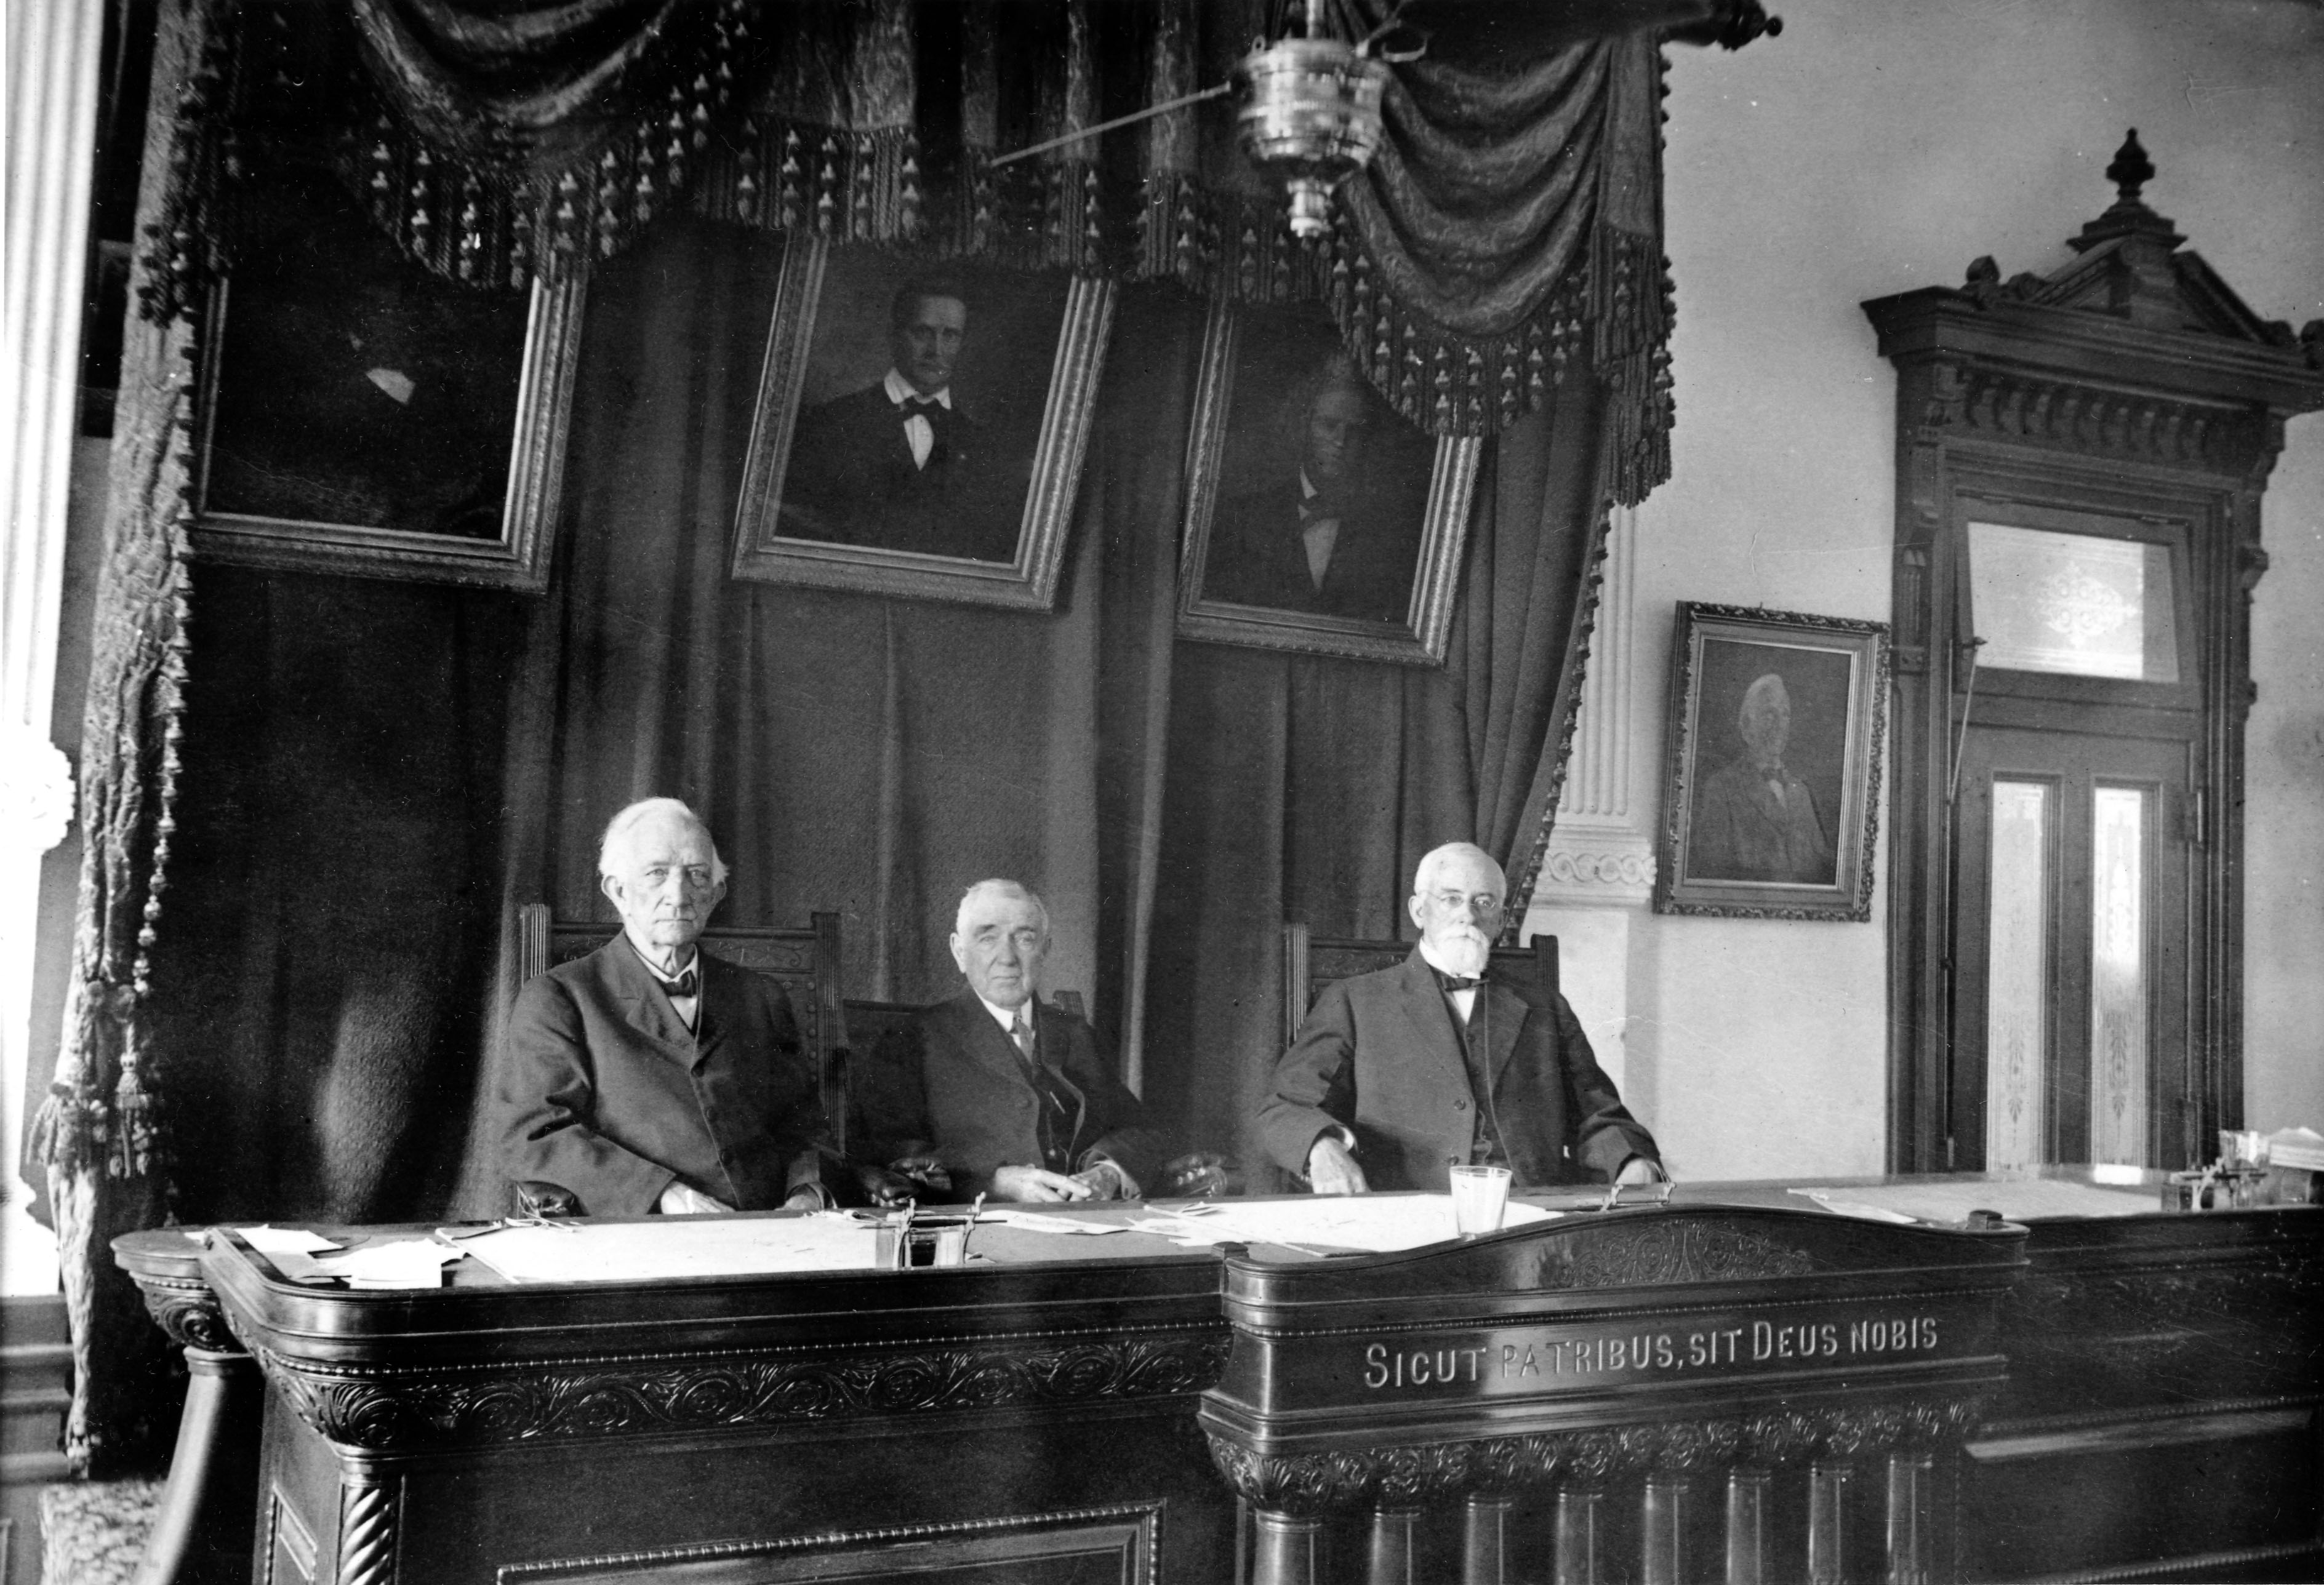 Left to Right: Justice Thomas J. Brown, Chief Justice Reuben R. Gaines, Justice Frank A. Williams. c. 1900. Photo: Texas Supreme Court Archives.